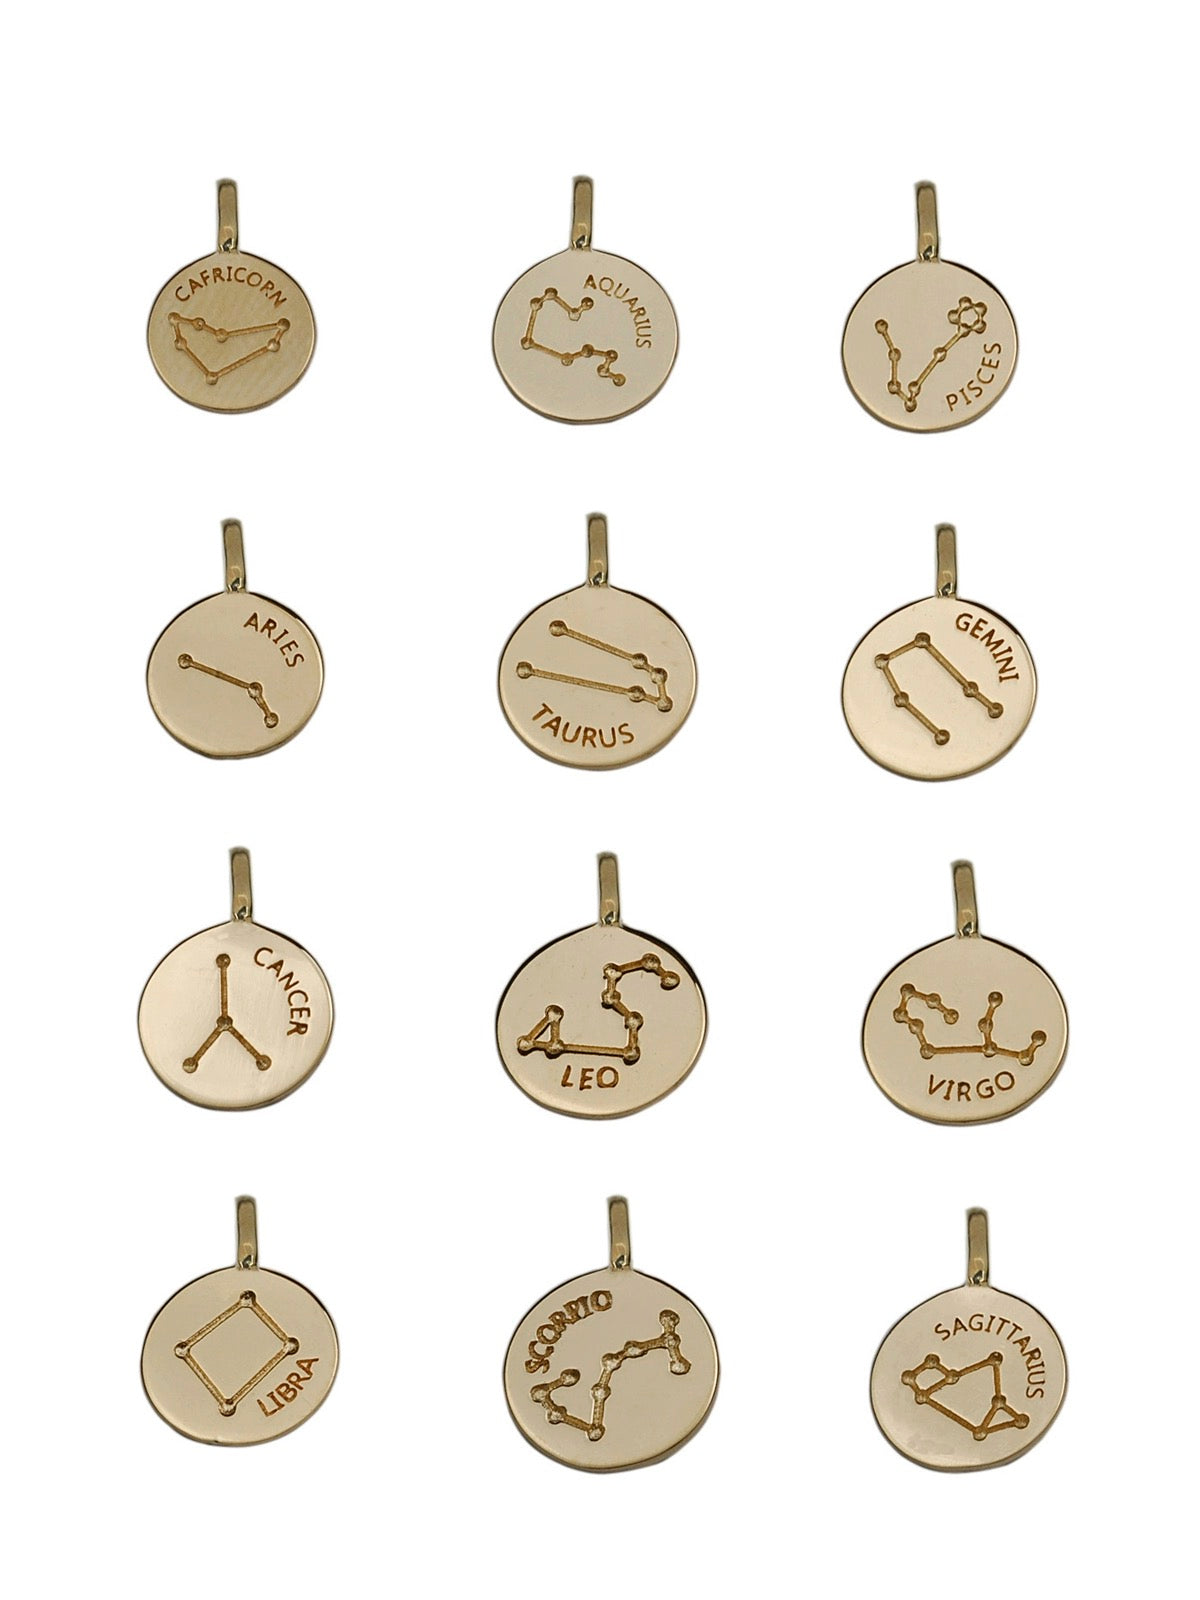 Solid Gold Zodiac Pendant: Personalized Gift for Every Star Sign